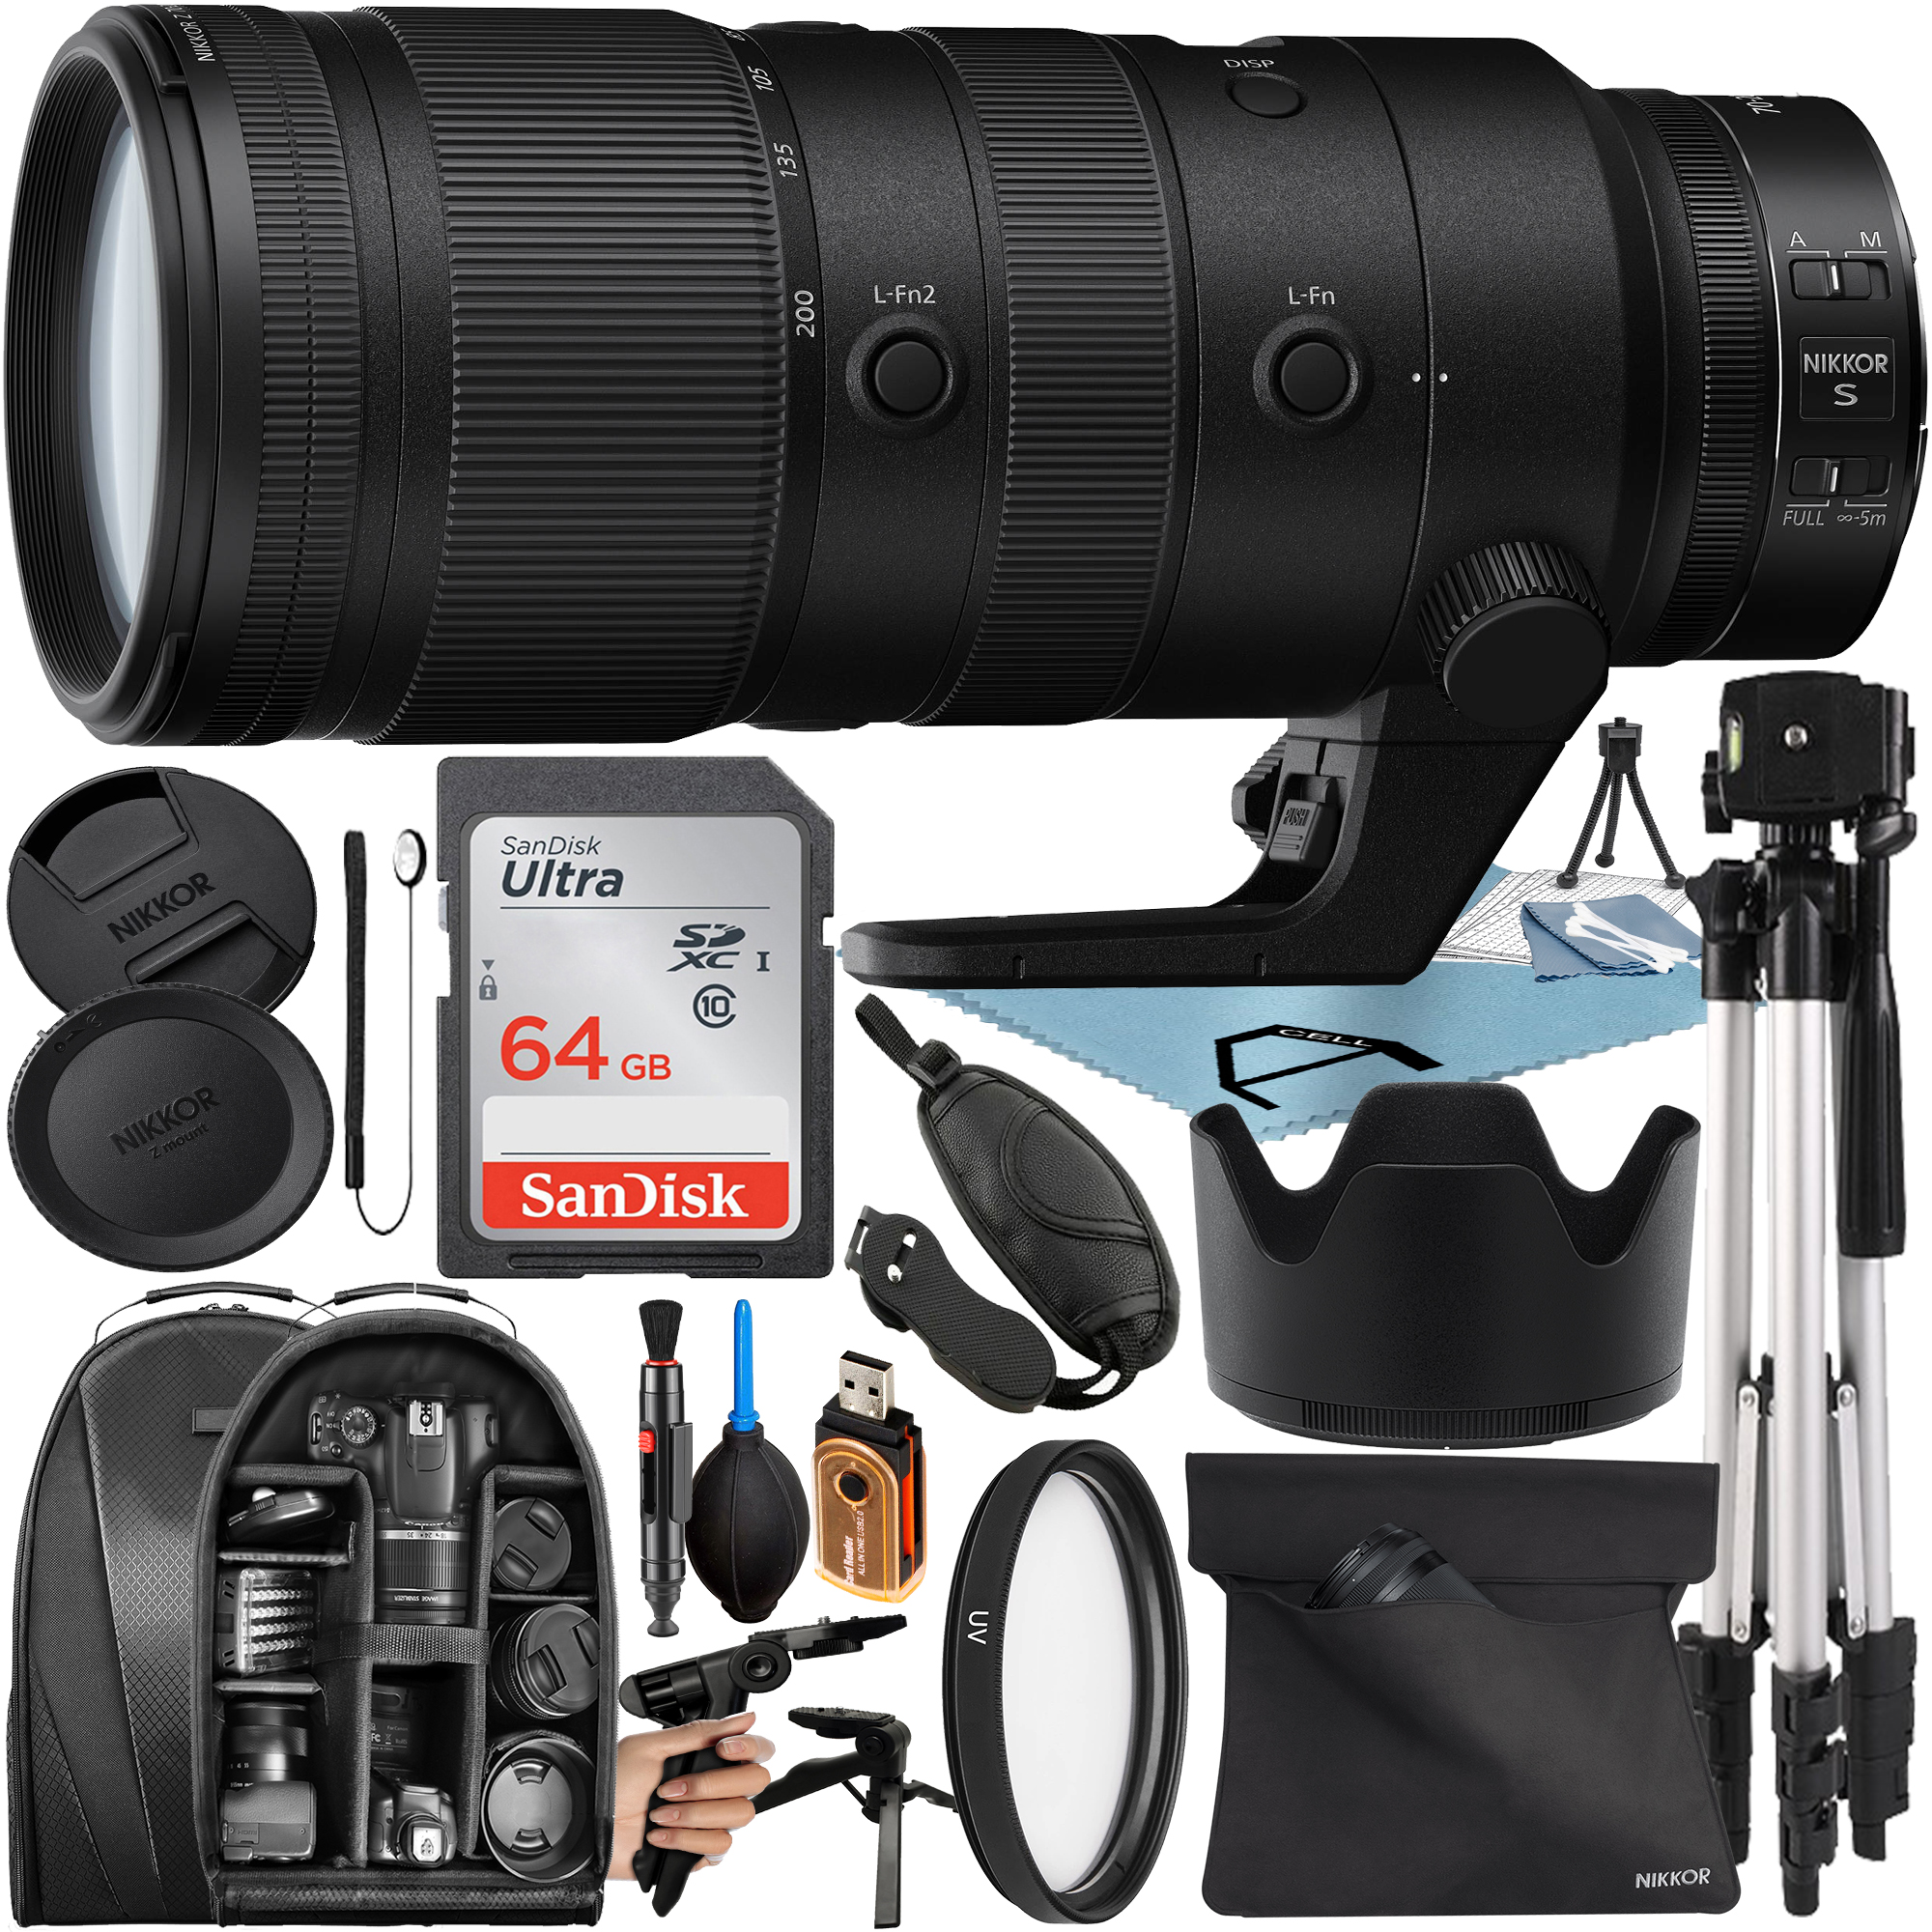 Nikon NIKKOR Z 70-200mm F/2.8 VR S Lens with 64GB SanDisk Memory Card + Tripod + Backpack + A-Cell Accessory Bundle